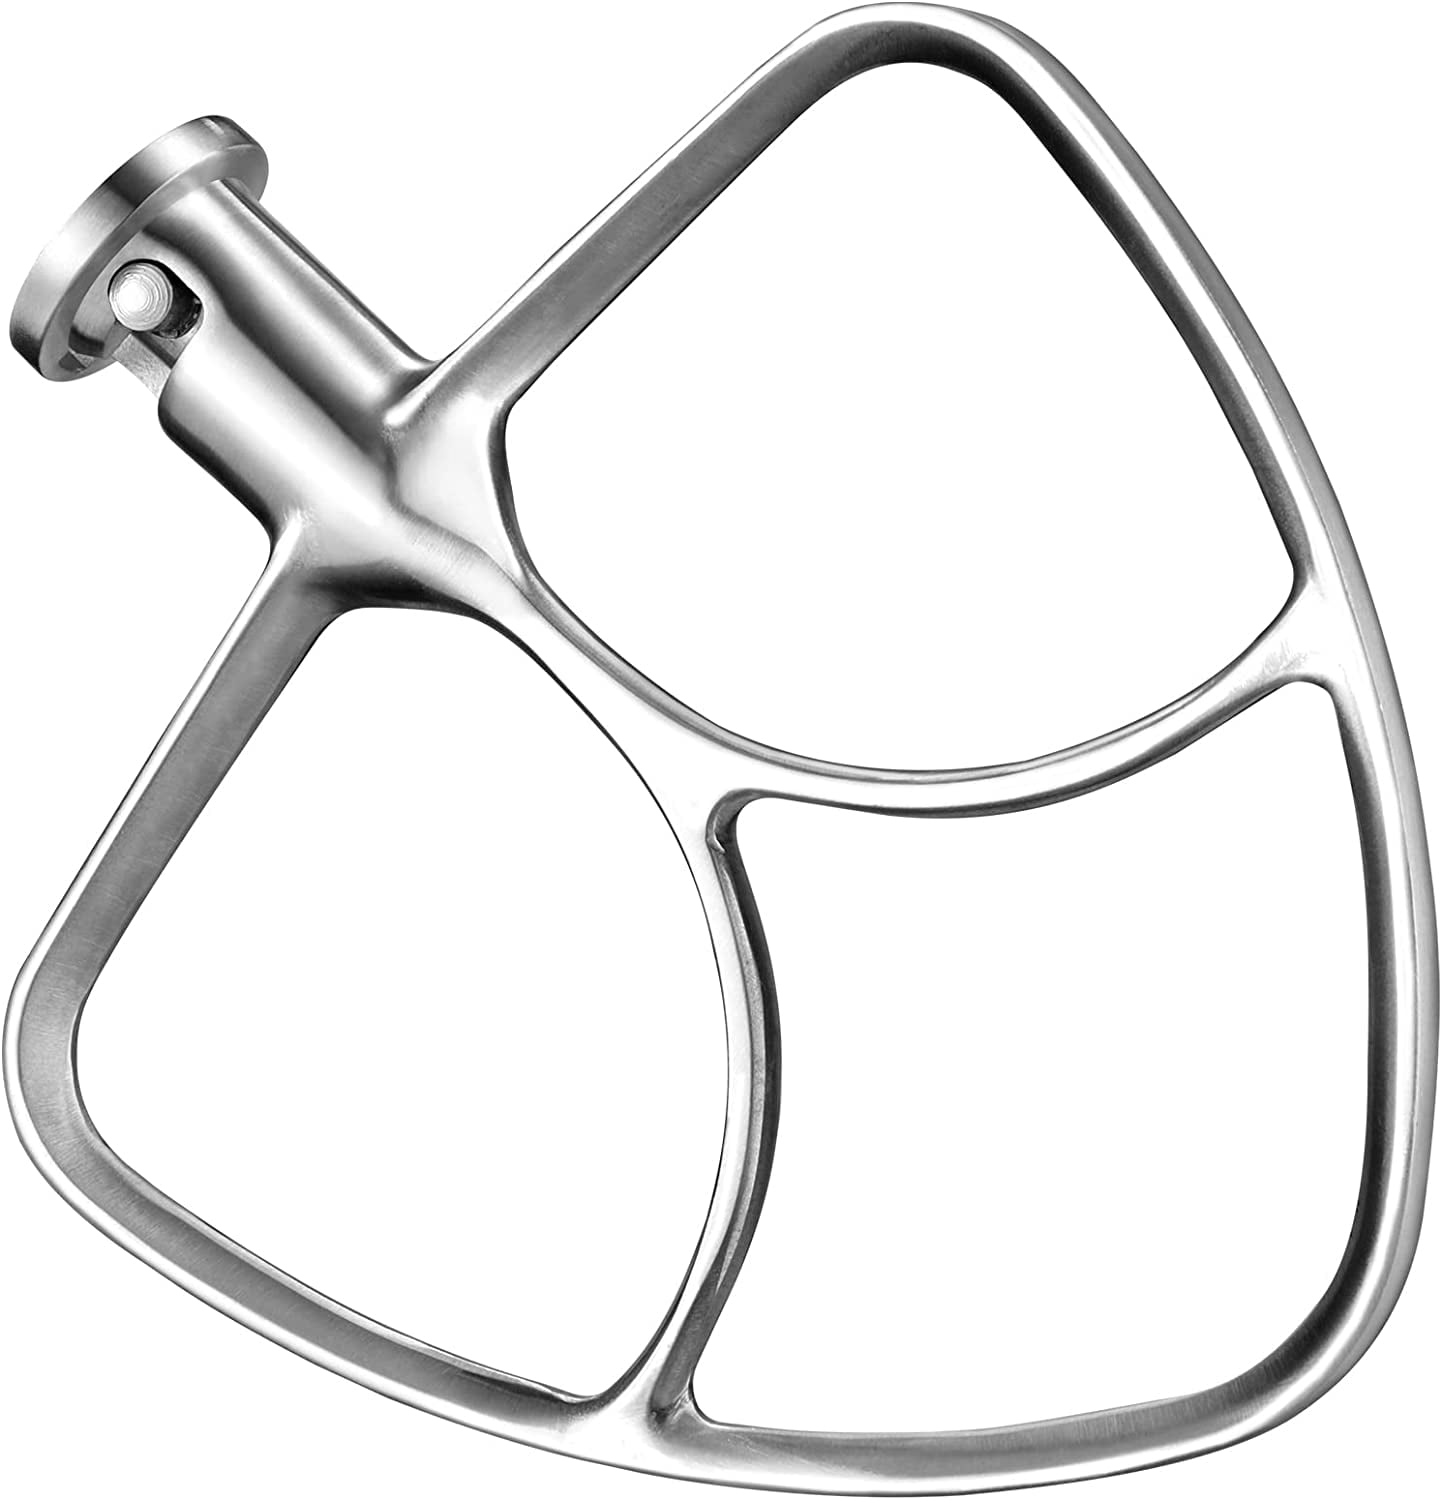 Lawenme Flex Edge Beater Mixer Attachments for Kitchenaid Tilt-Head Stand  Mixers, Mixer Accessory 4.5-5 Quart Beater Scraper Paddle with Both-Sides